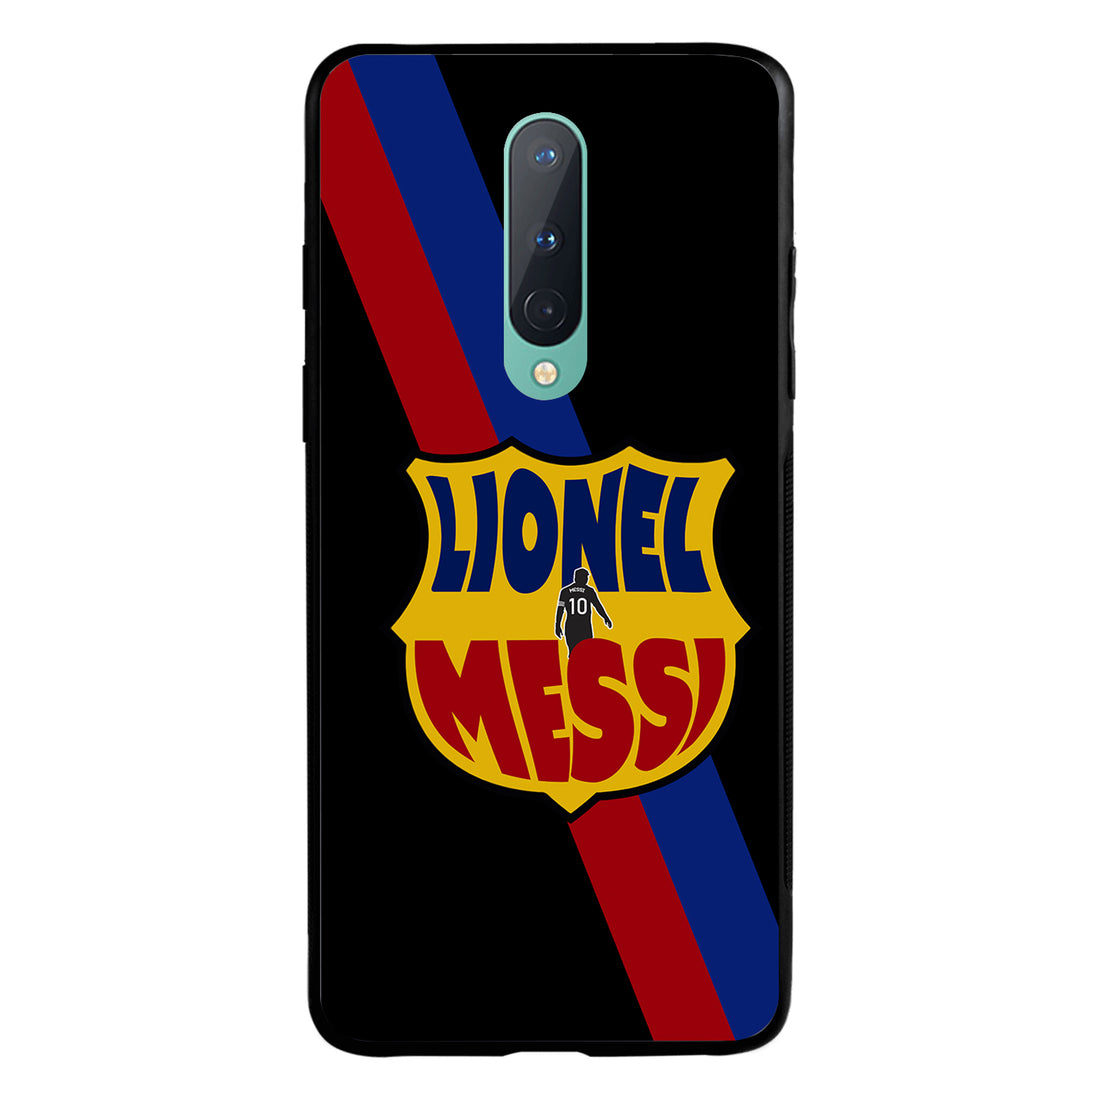 Lionel Messi Sports Oneplus 8 Back Case